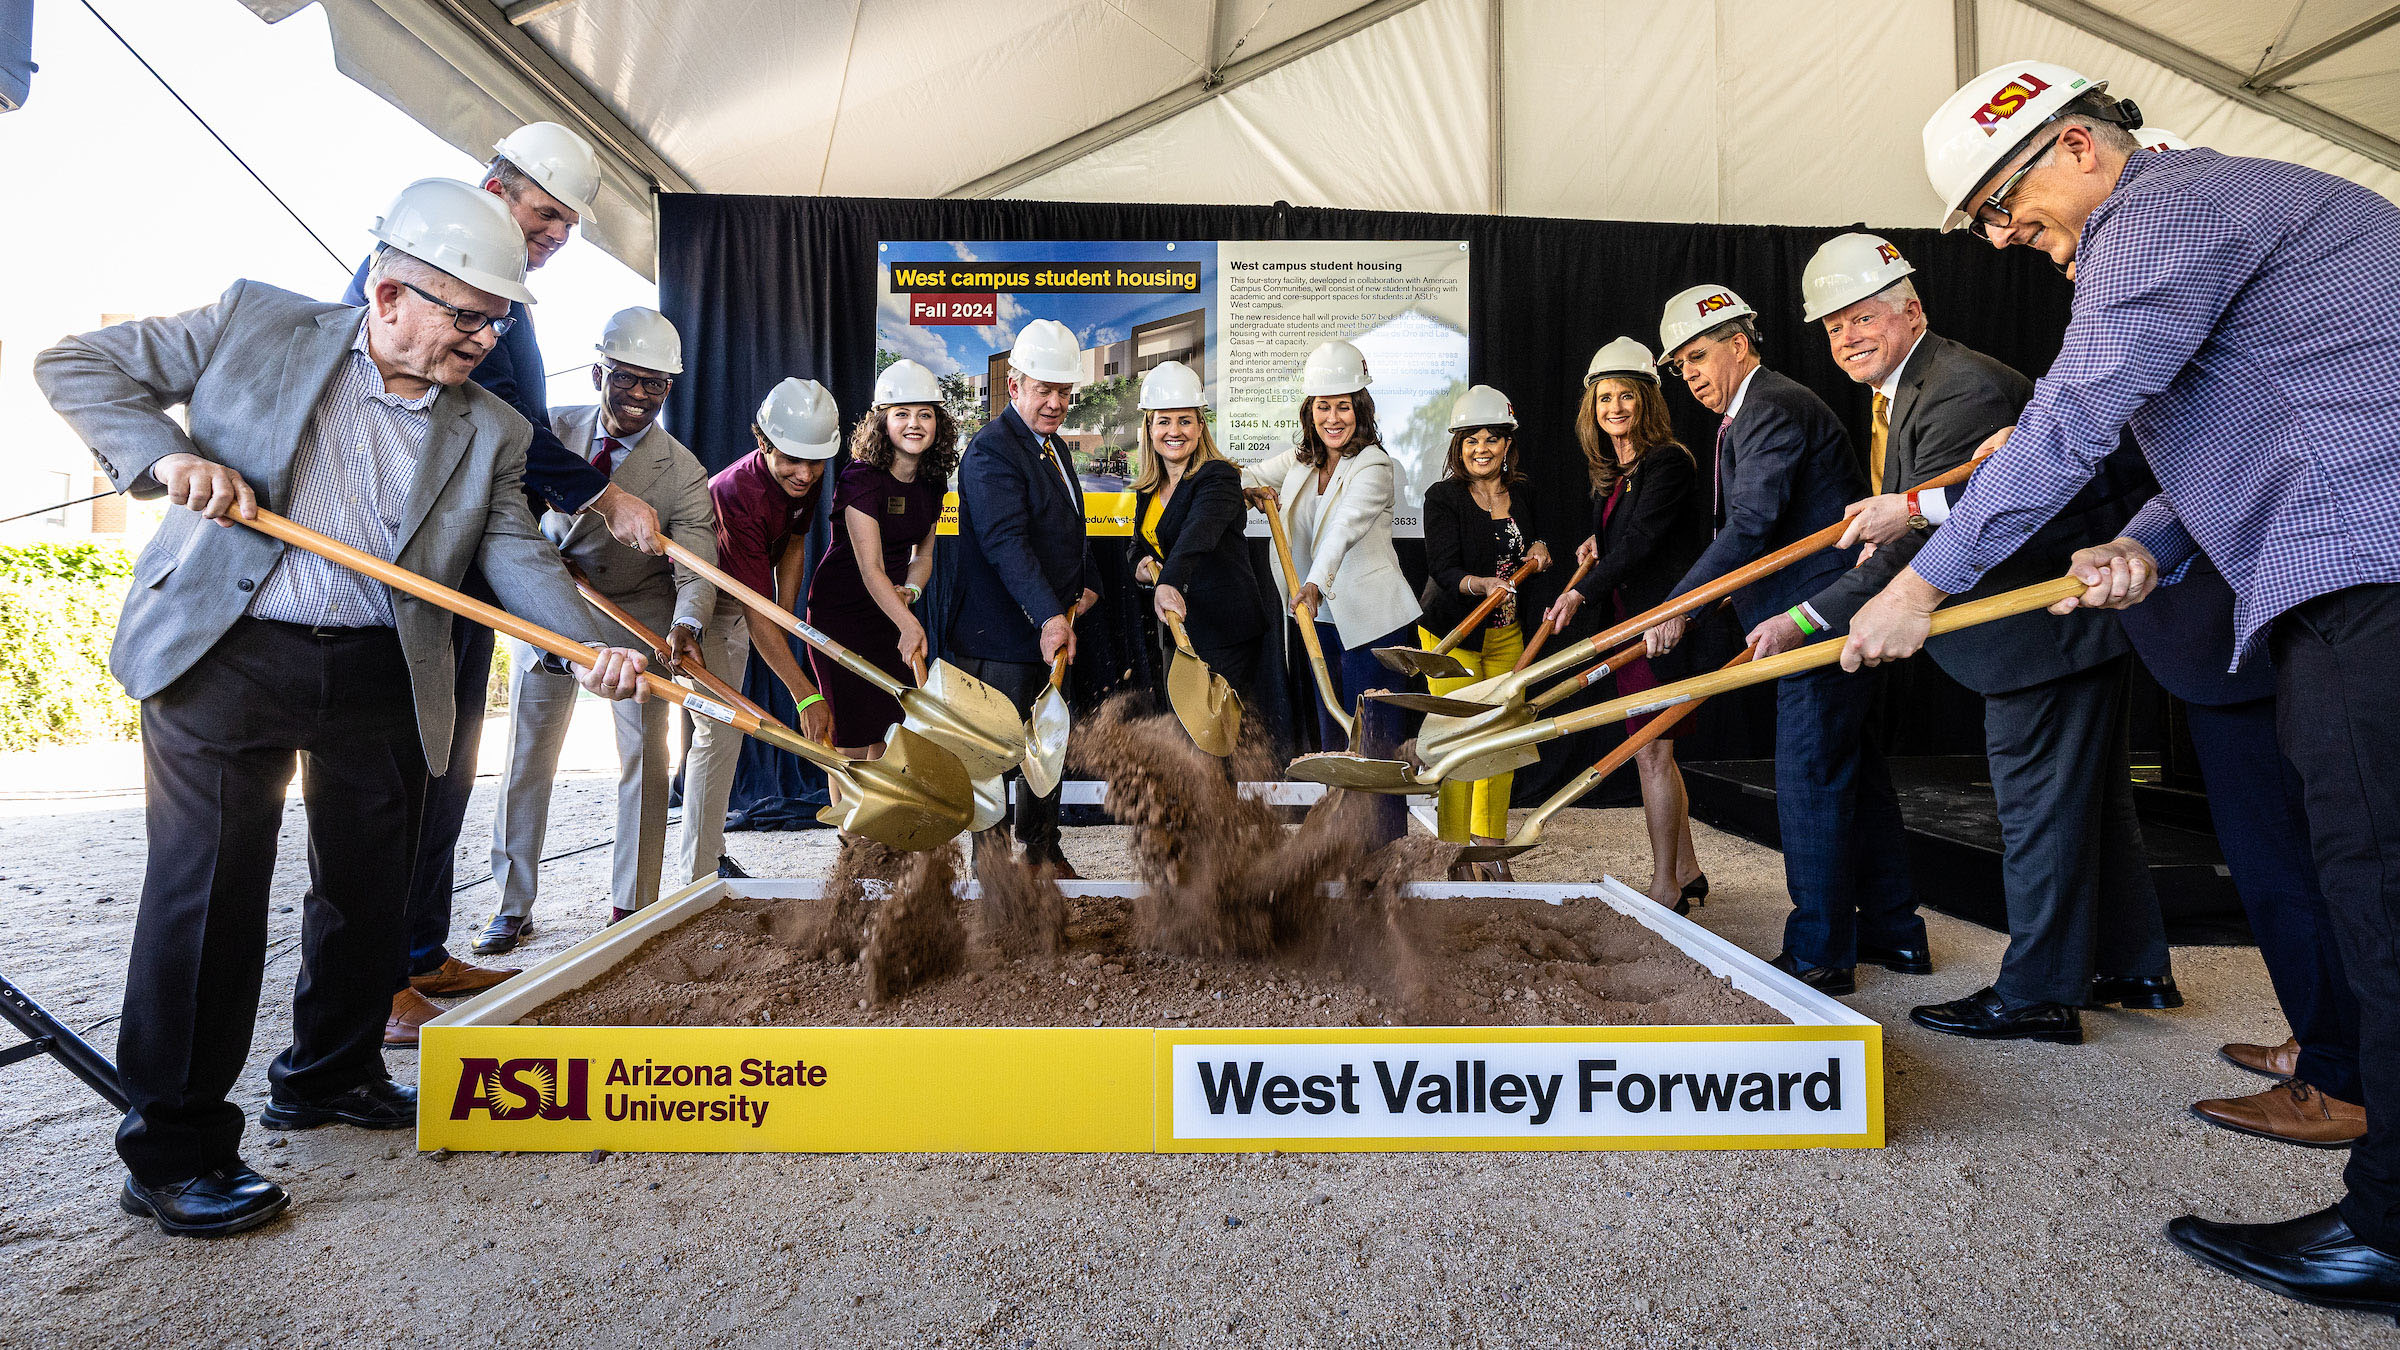 A group of 13 men and women, made up of community, political and ASU leaders, all dressed in business clothing and hard hats, use gold shovels to perform a ceremonial groundbreaking at the ASU West Campus.